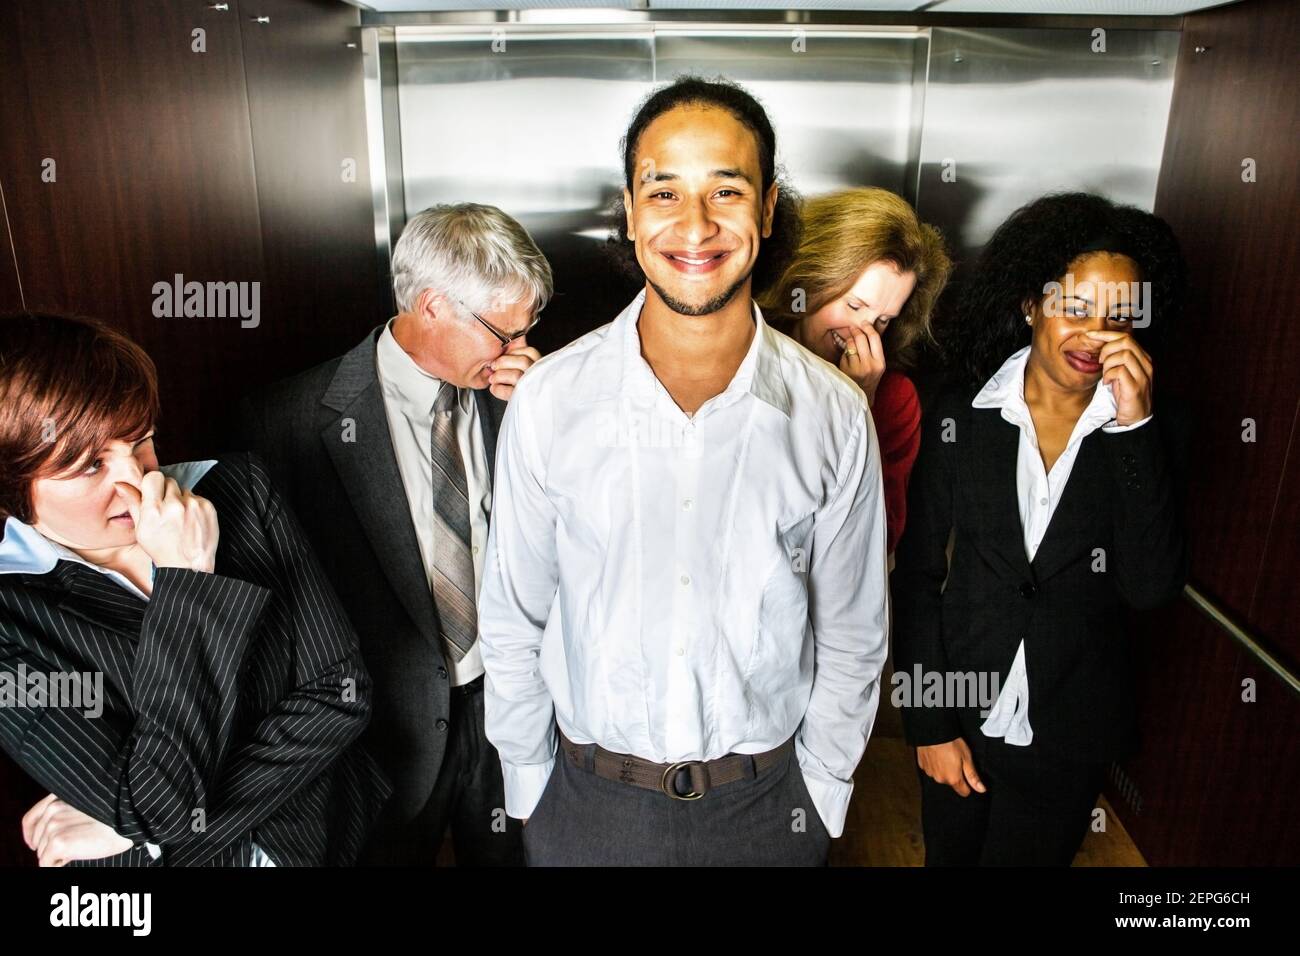 A young man smiles in embarrassment in an elevator while people hold their noses. Stock Photo